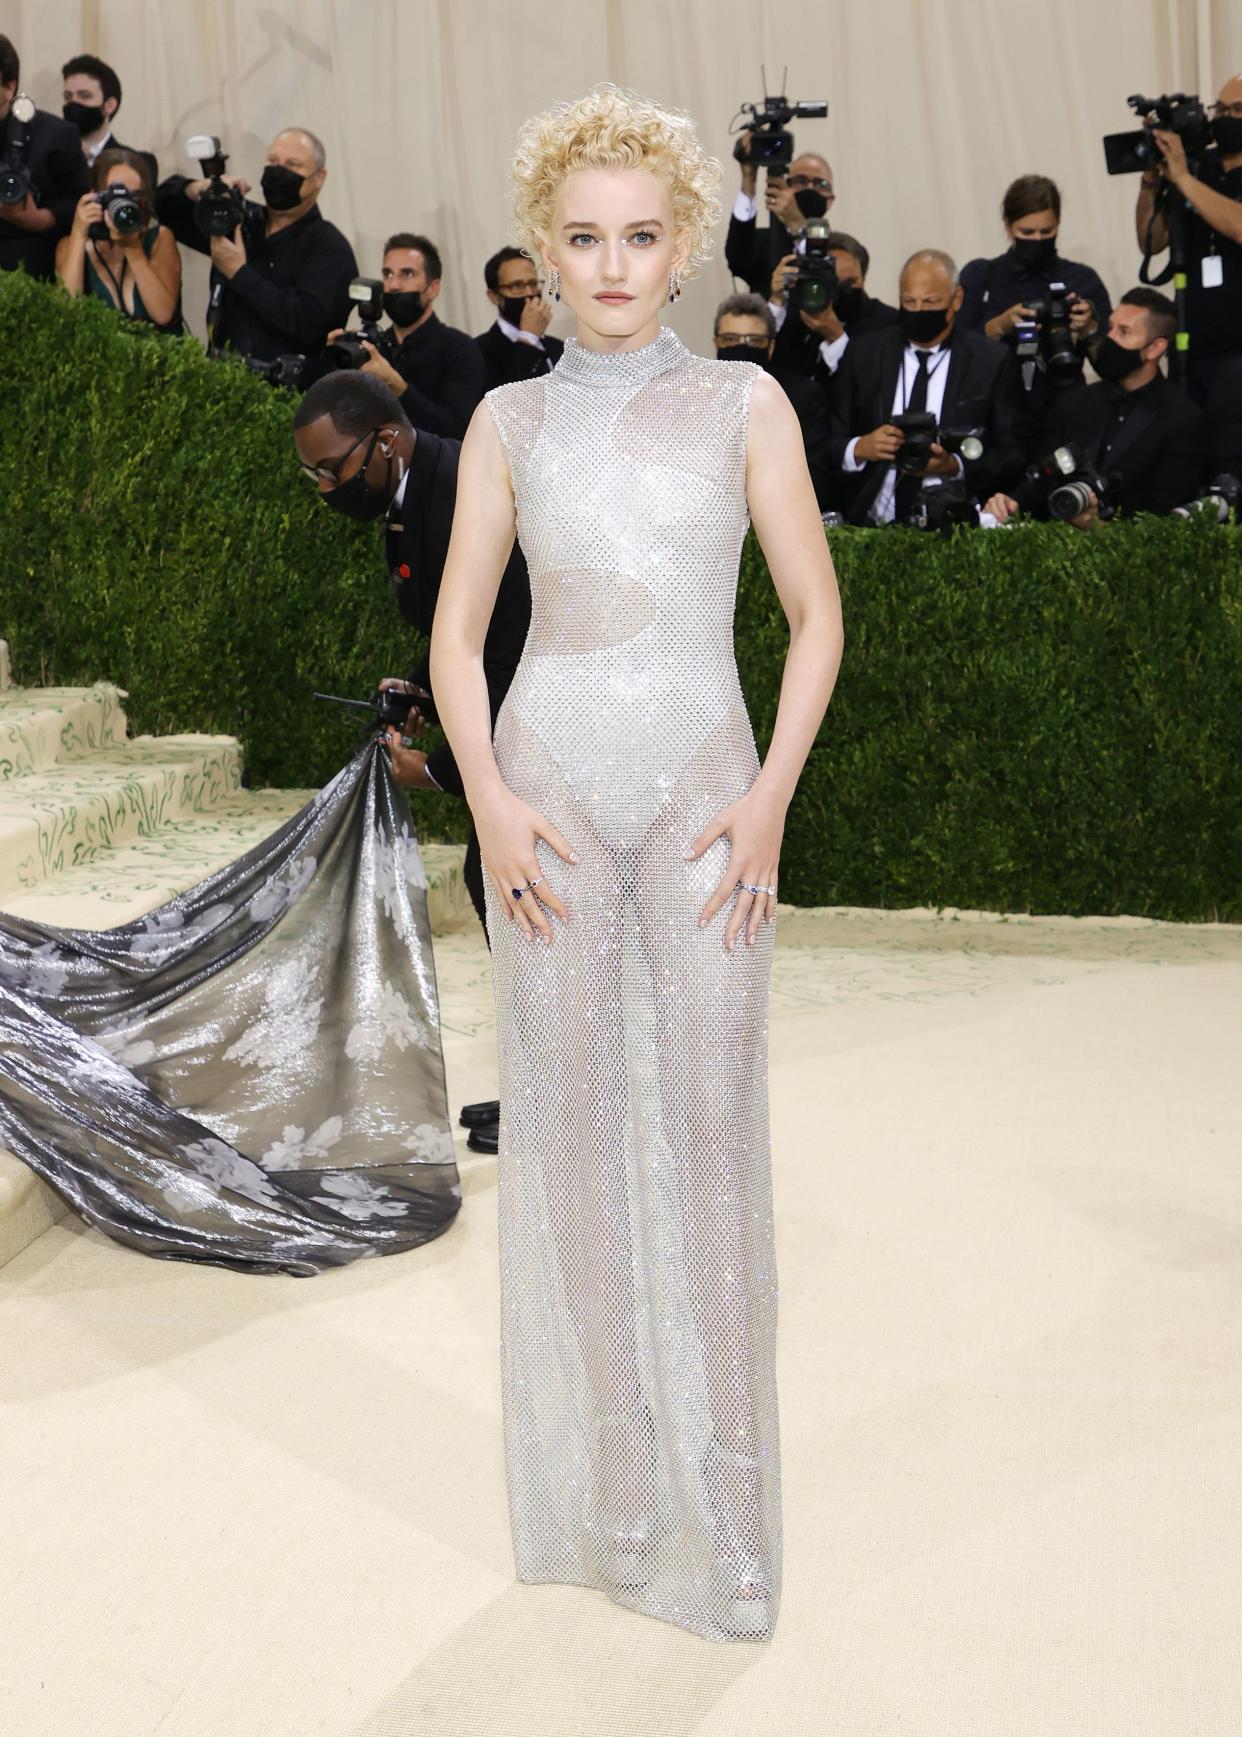 Julia Garner attends The 2021 Met Gala Celebrating In America: A Lexicon Of Fashion at Metropolitan Museum of Art on Sept. 13, 2021 in New York.